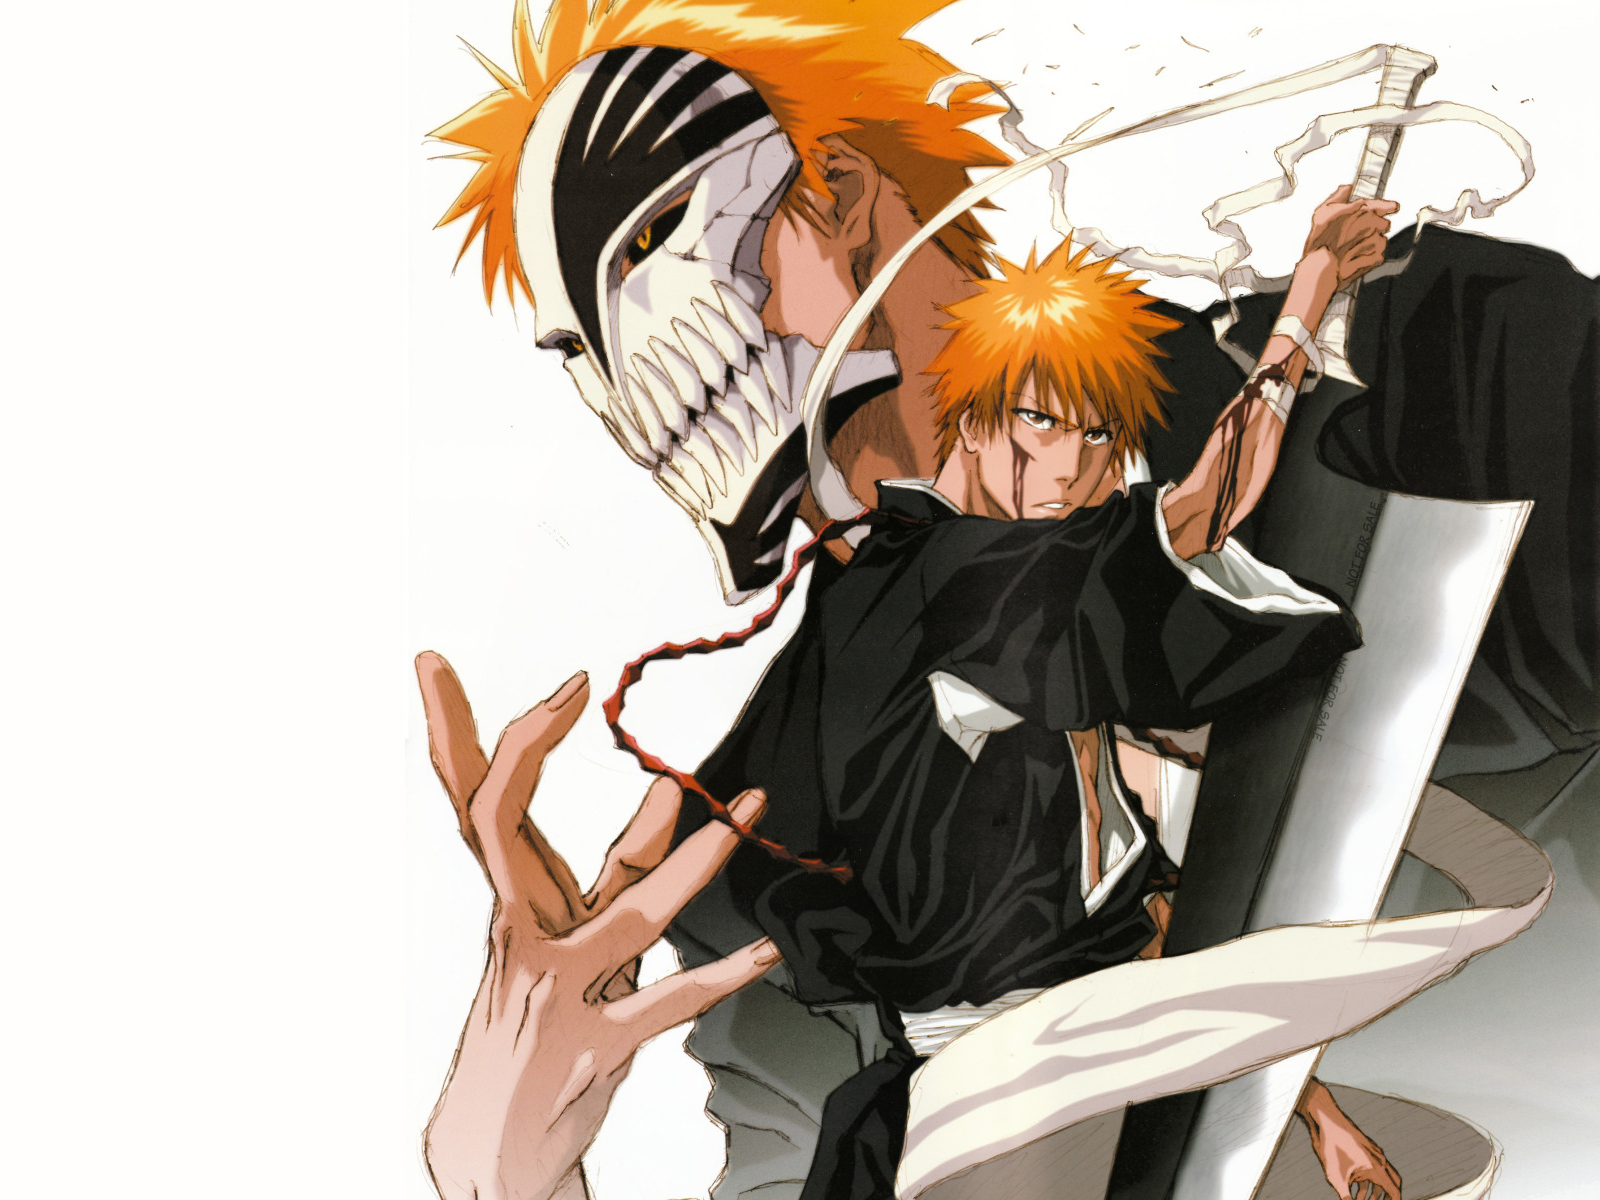 Bleach Image - ID: 161460 - Image Abyss.